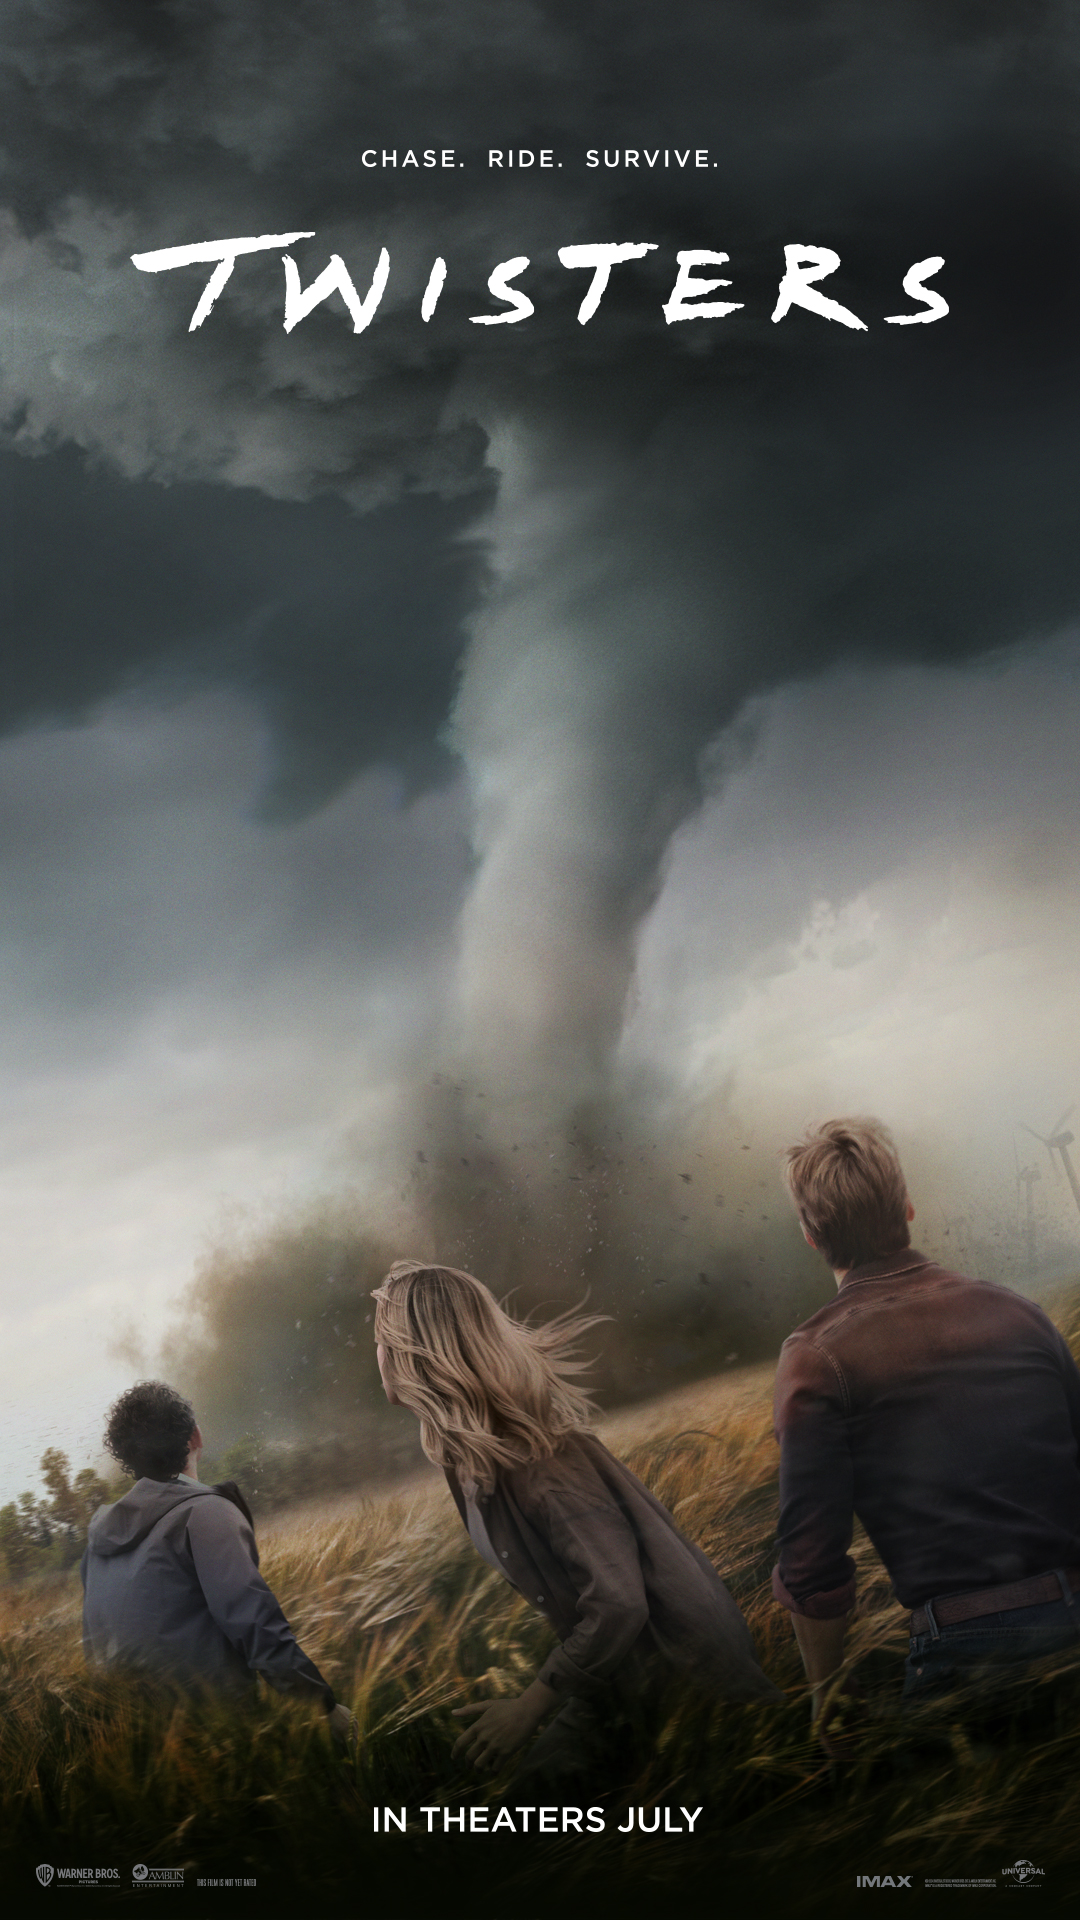 Twisters Trailer Provides First Look at Glen Powell-Led Disaster Movie